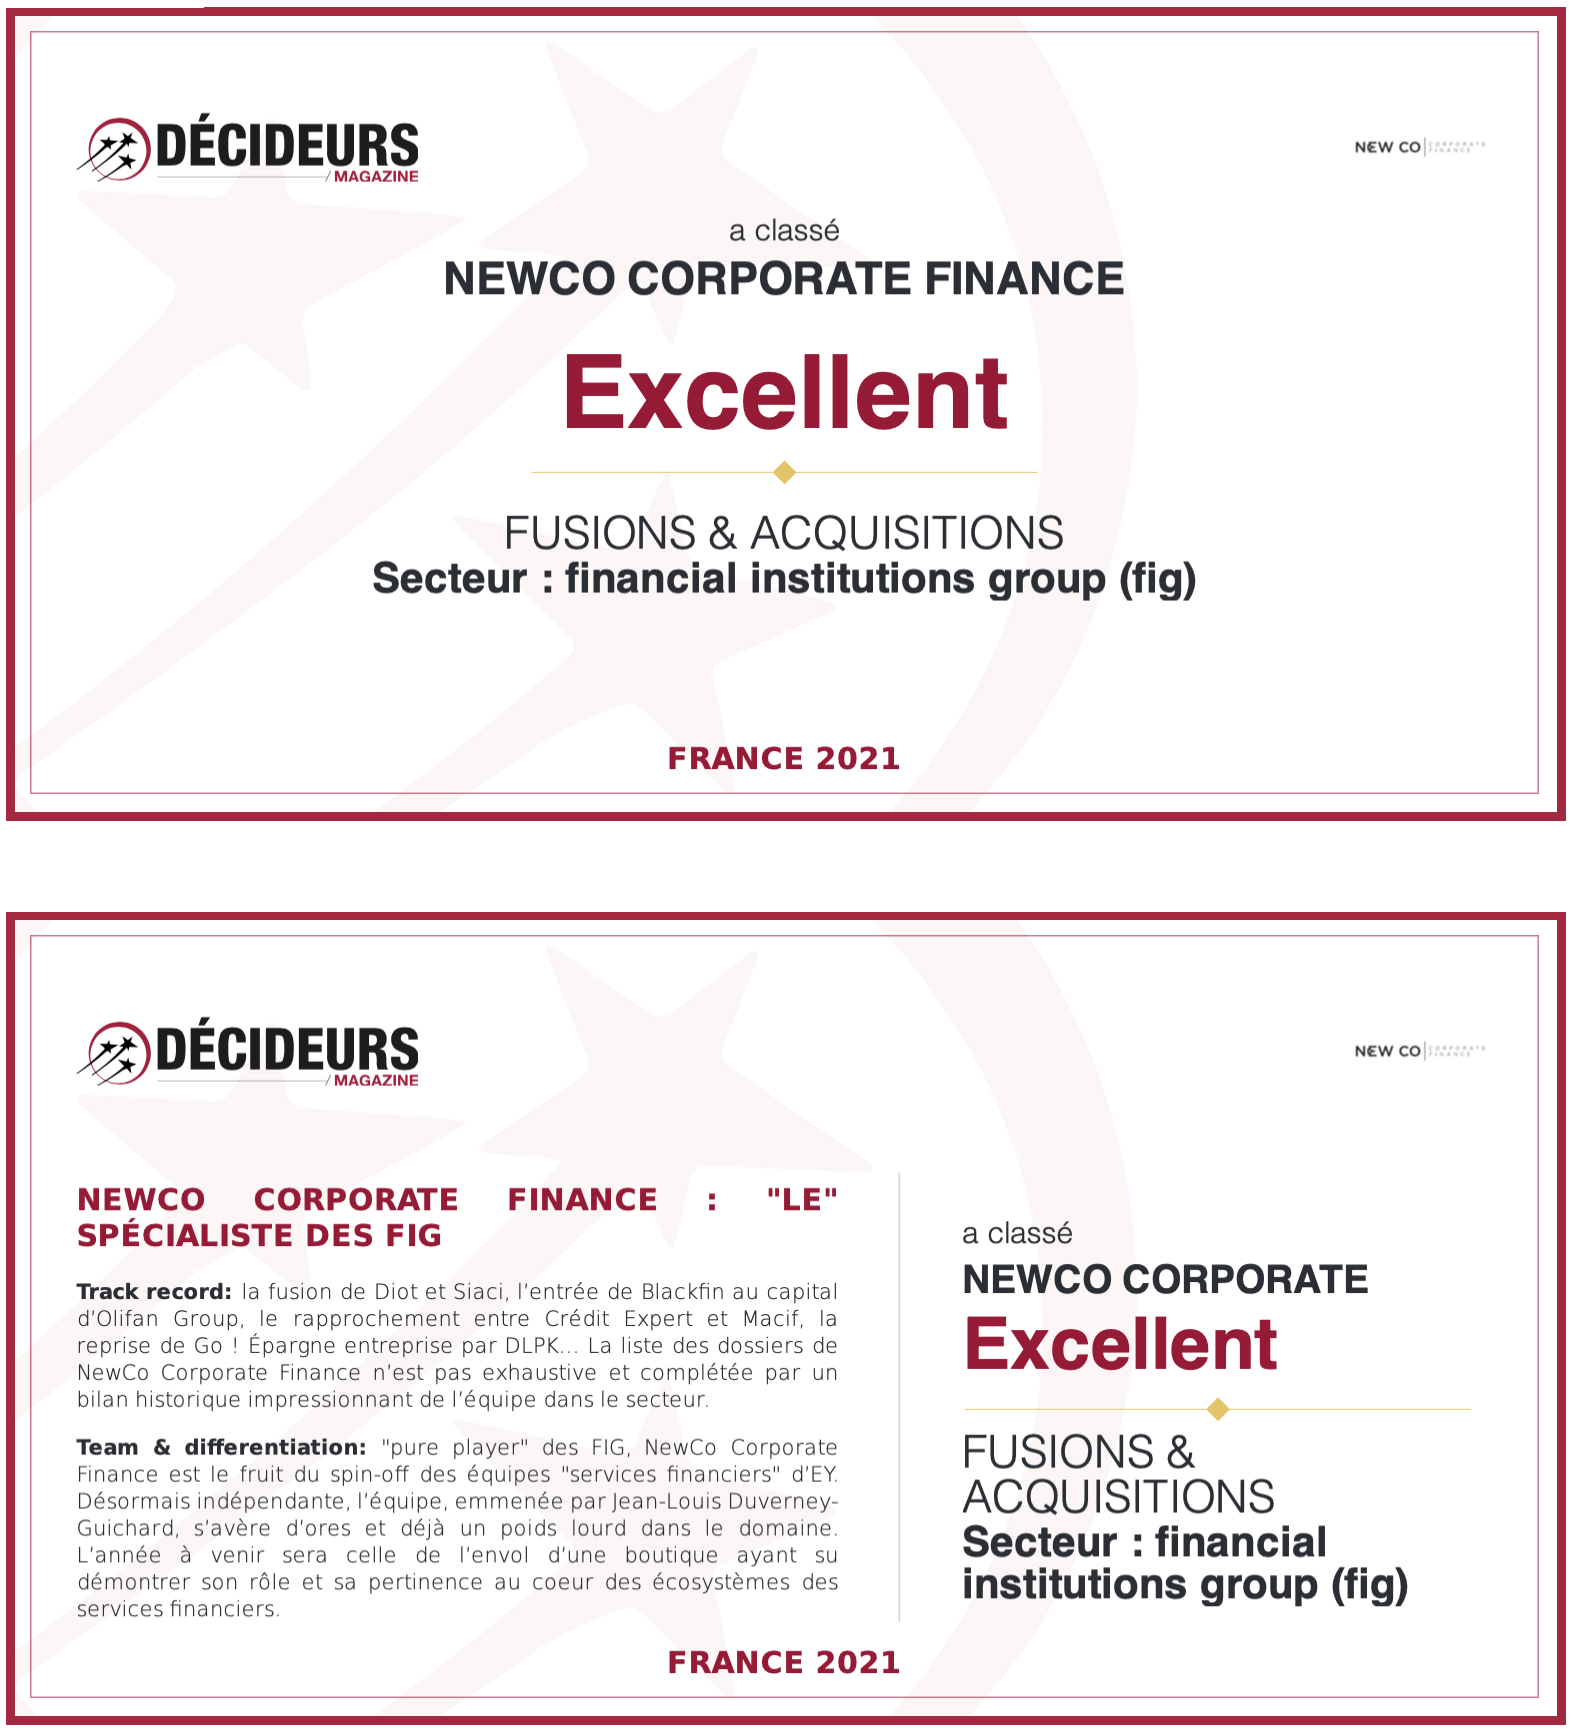 One year after its inception, NewCo Corporate Finance is ranked Excellent in the Leaders League ranking